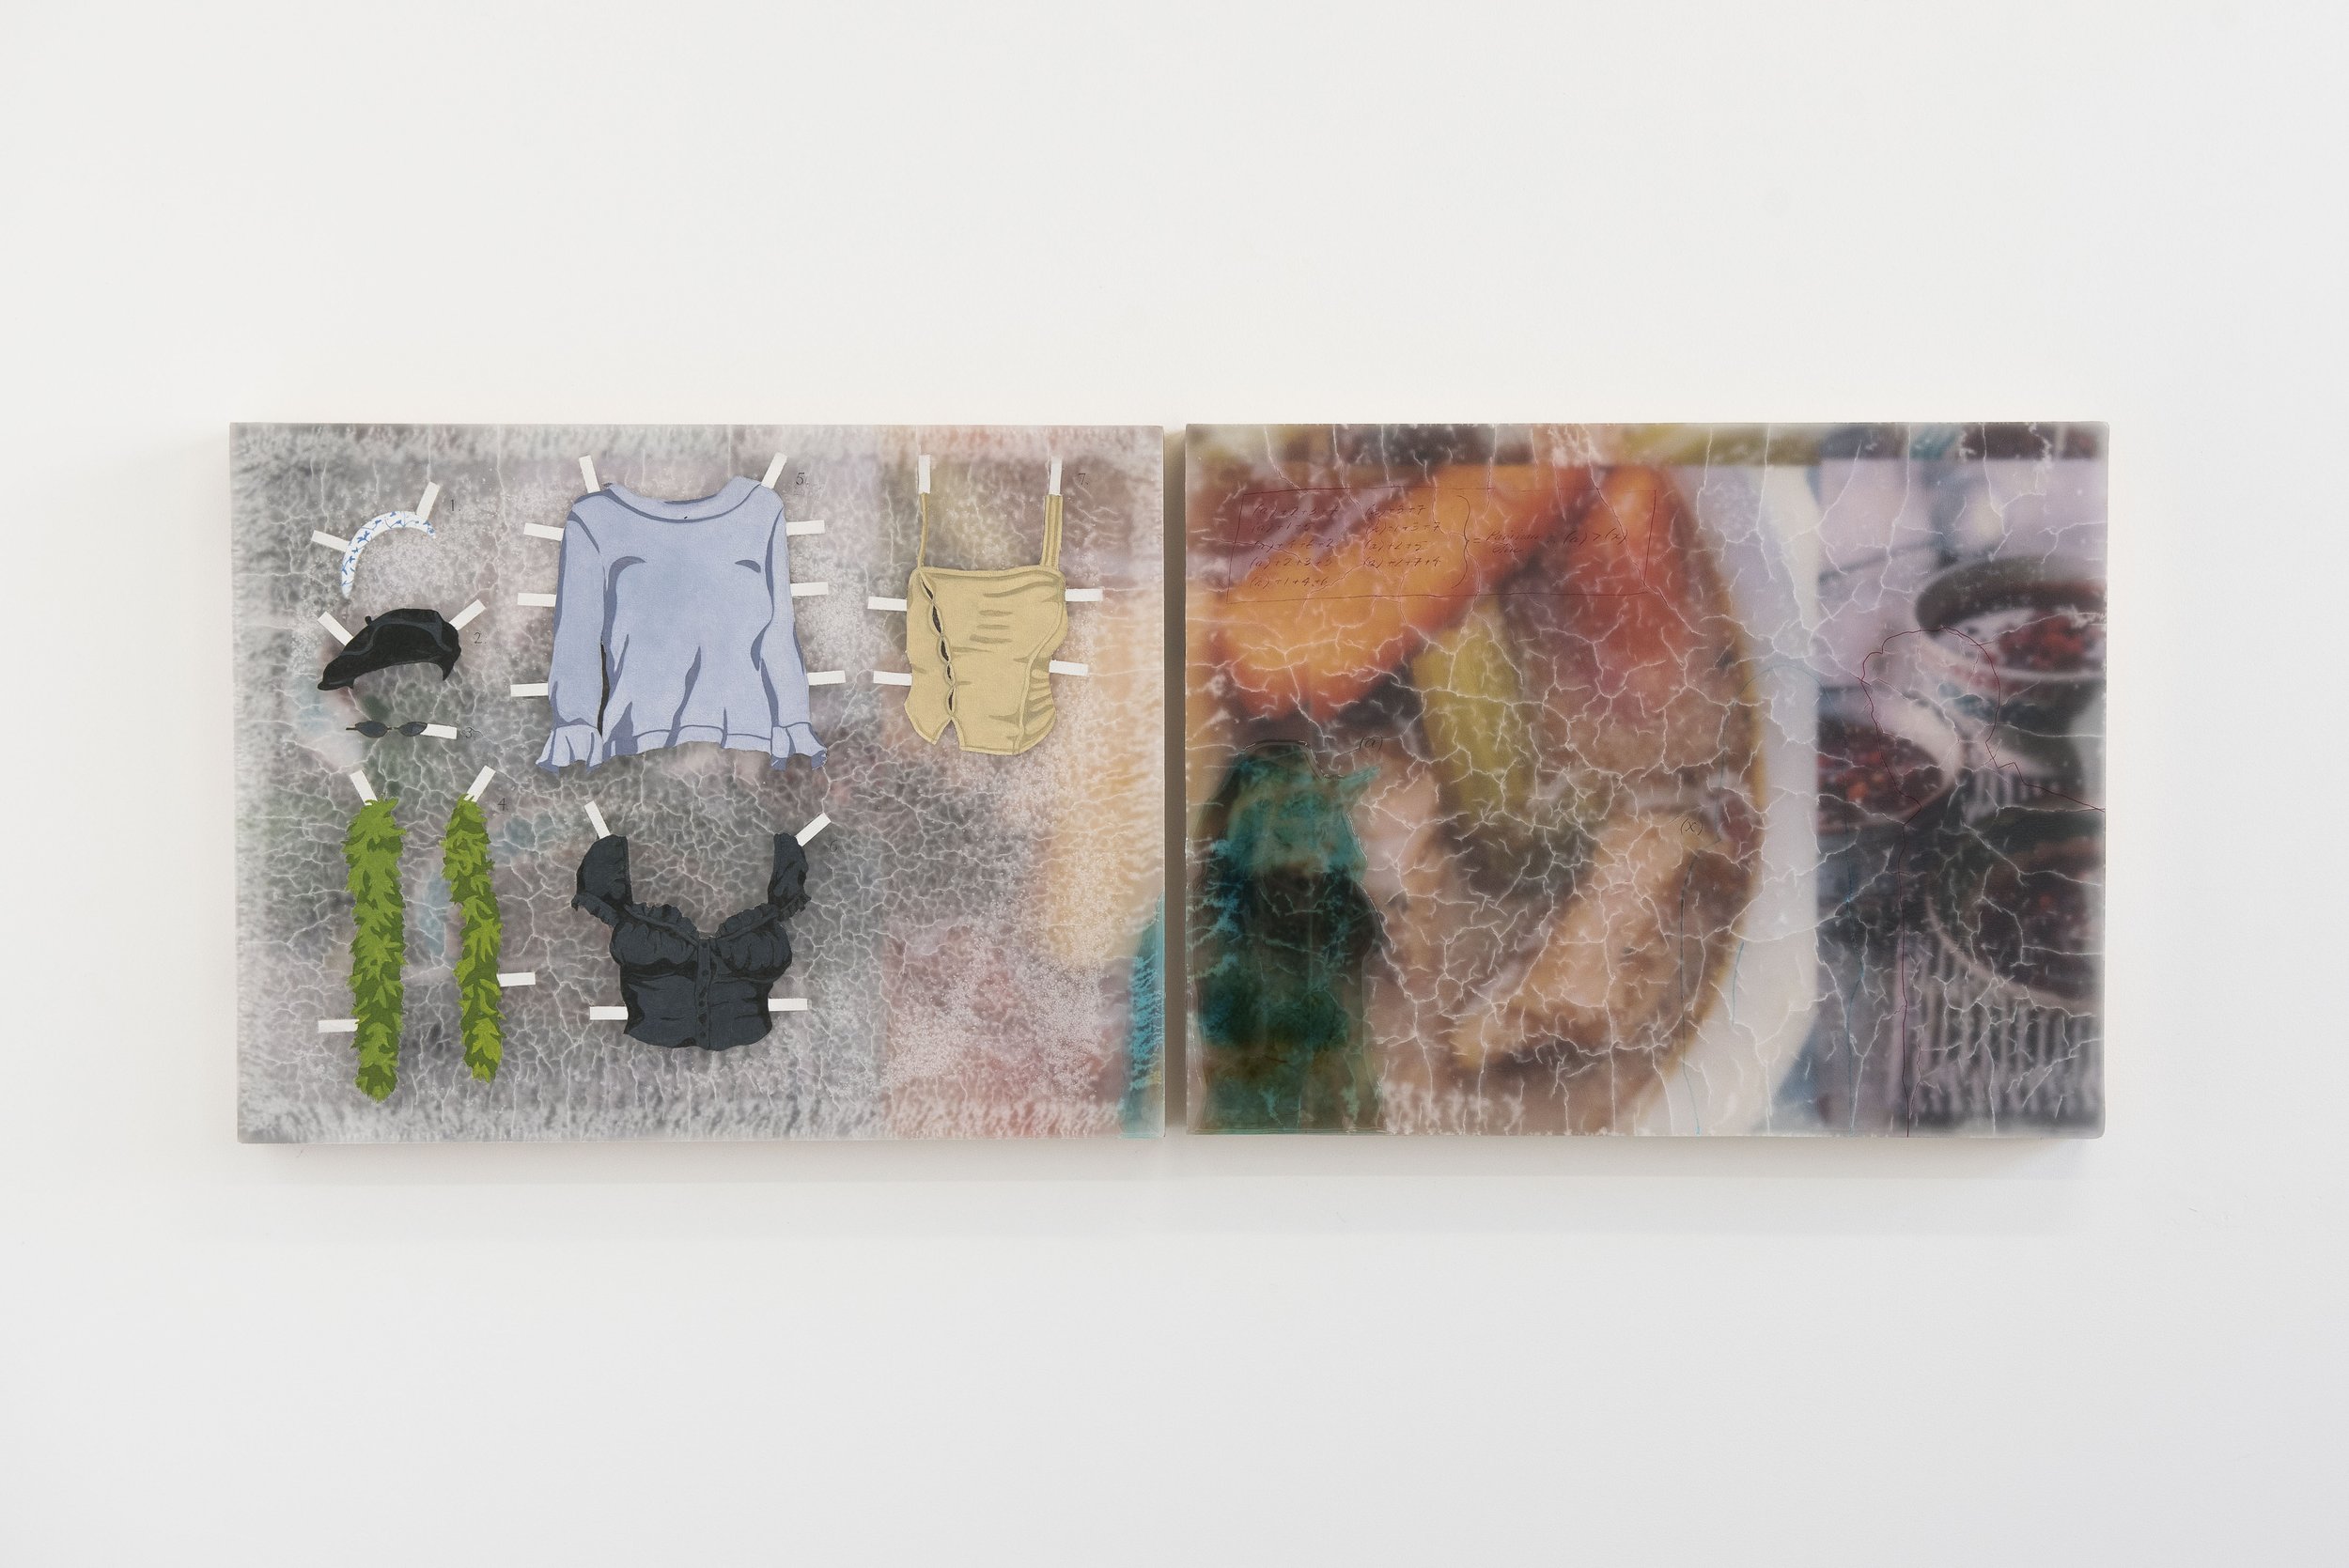   Carrie as Parisian Chic , 2021   Diptych - paraffin wax, resin, oil paint, paper, canvas, found objects on plywood and pine cradle frame.   Each panel measures 51.5 x 40 x 4 cm.   Image courtesy of Jordan Halsall. 